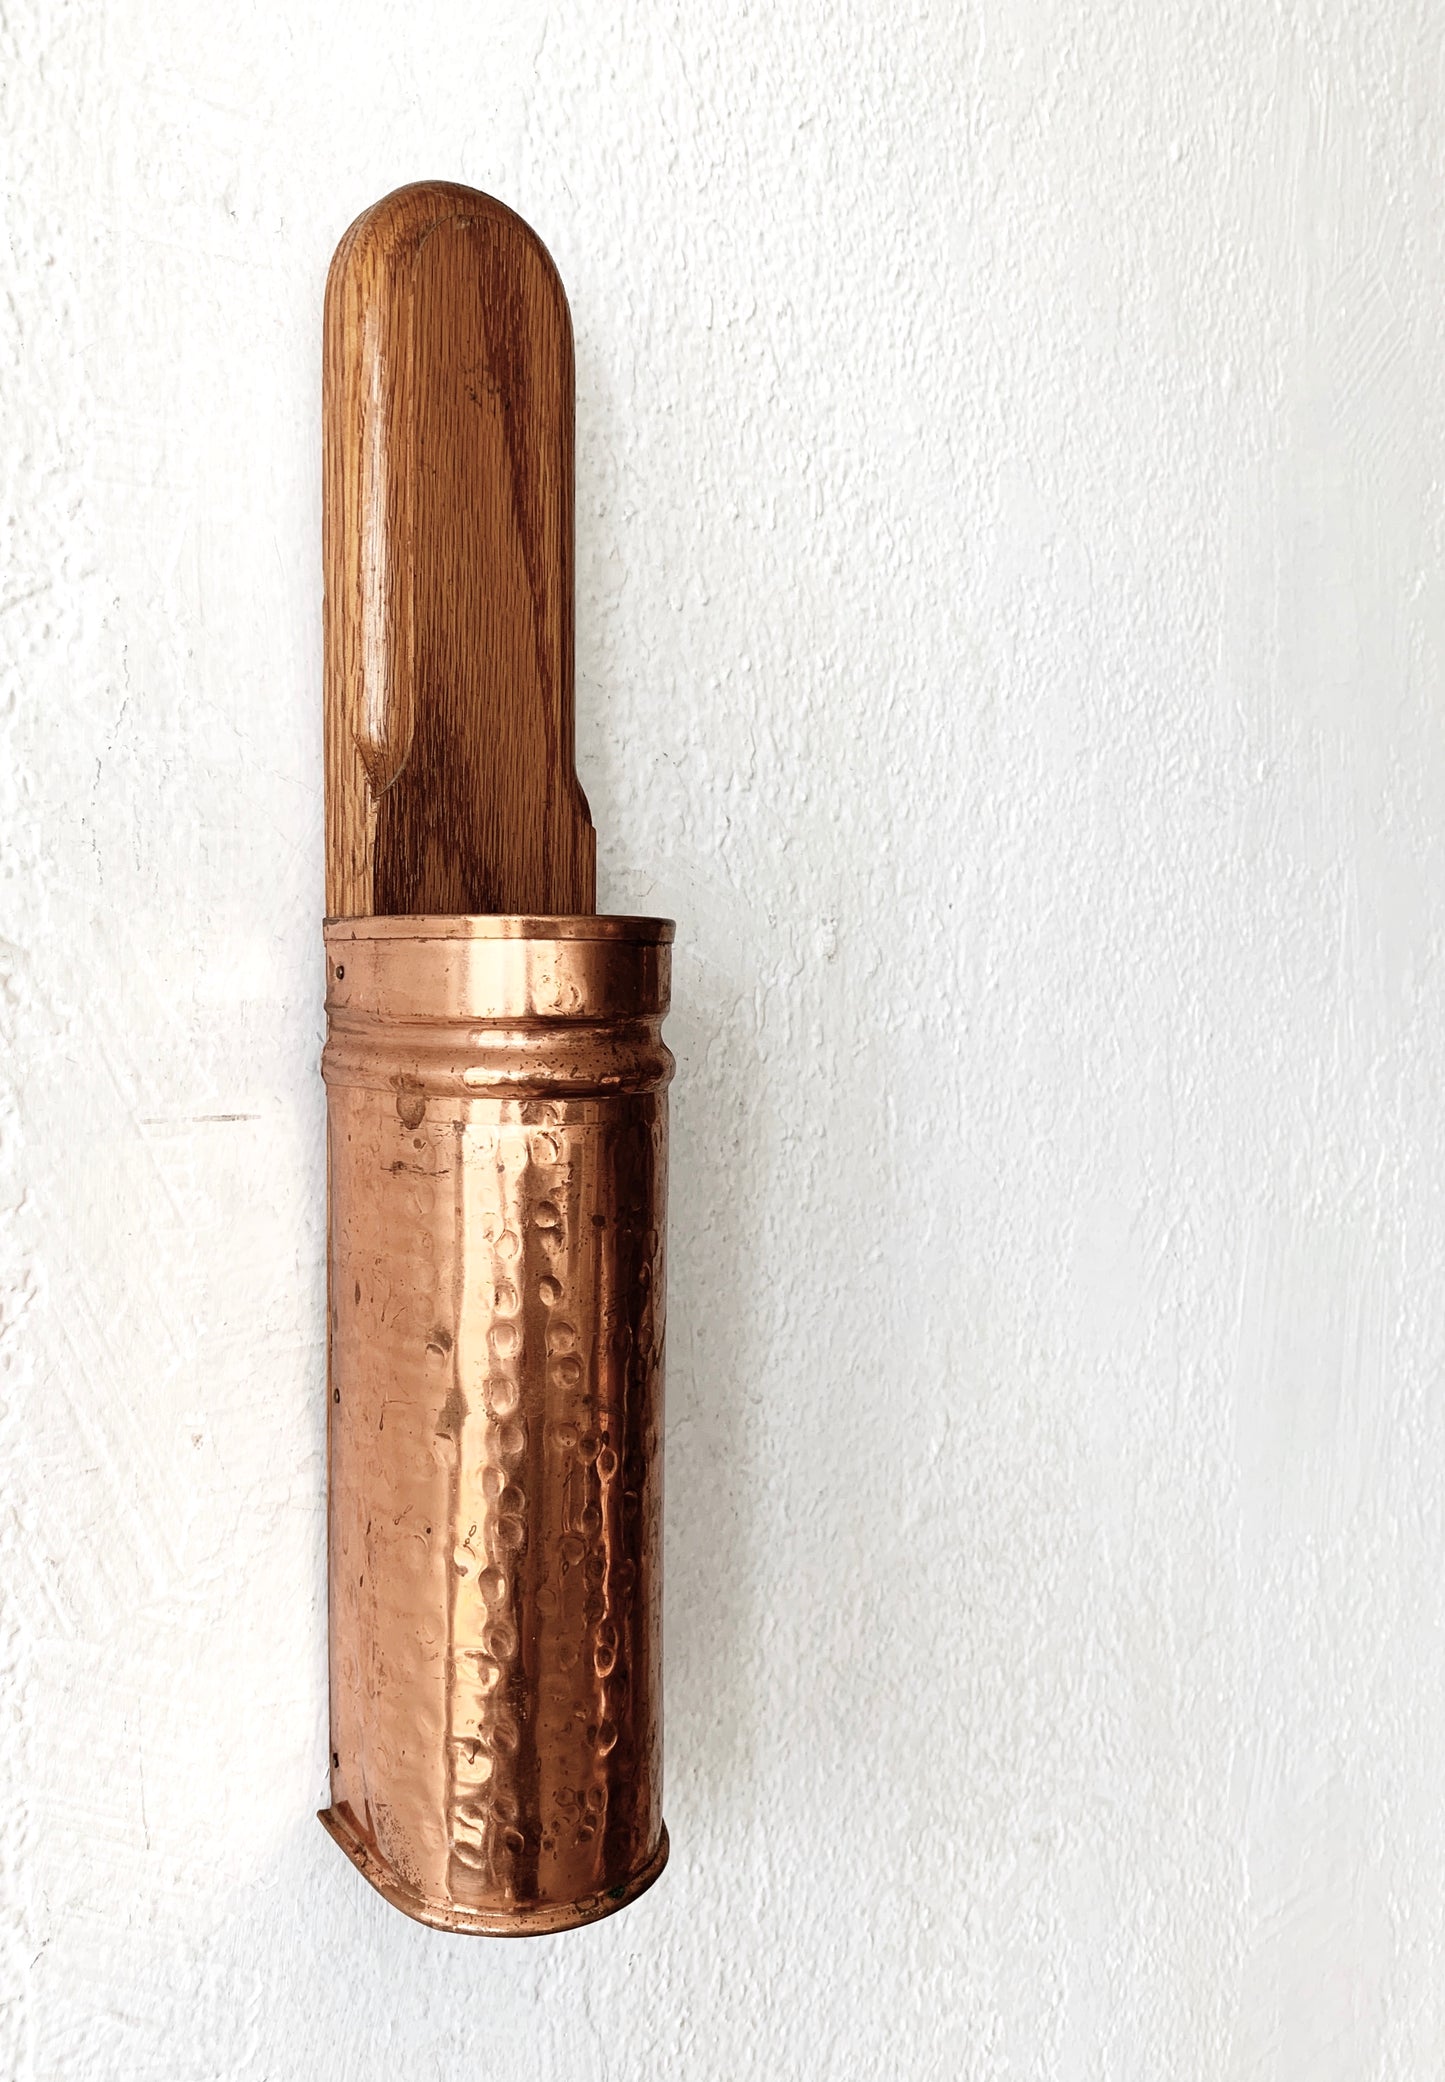 Copper and Wood Matchstick Holder with Matches